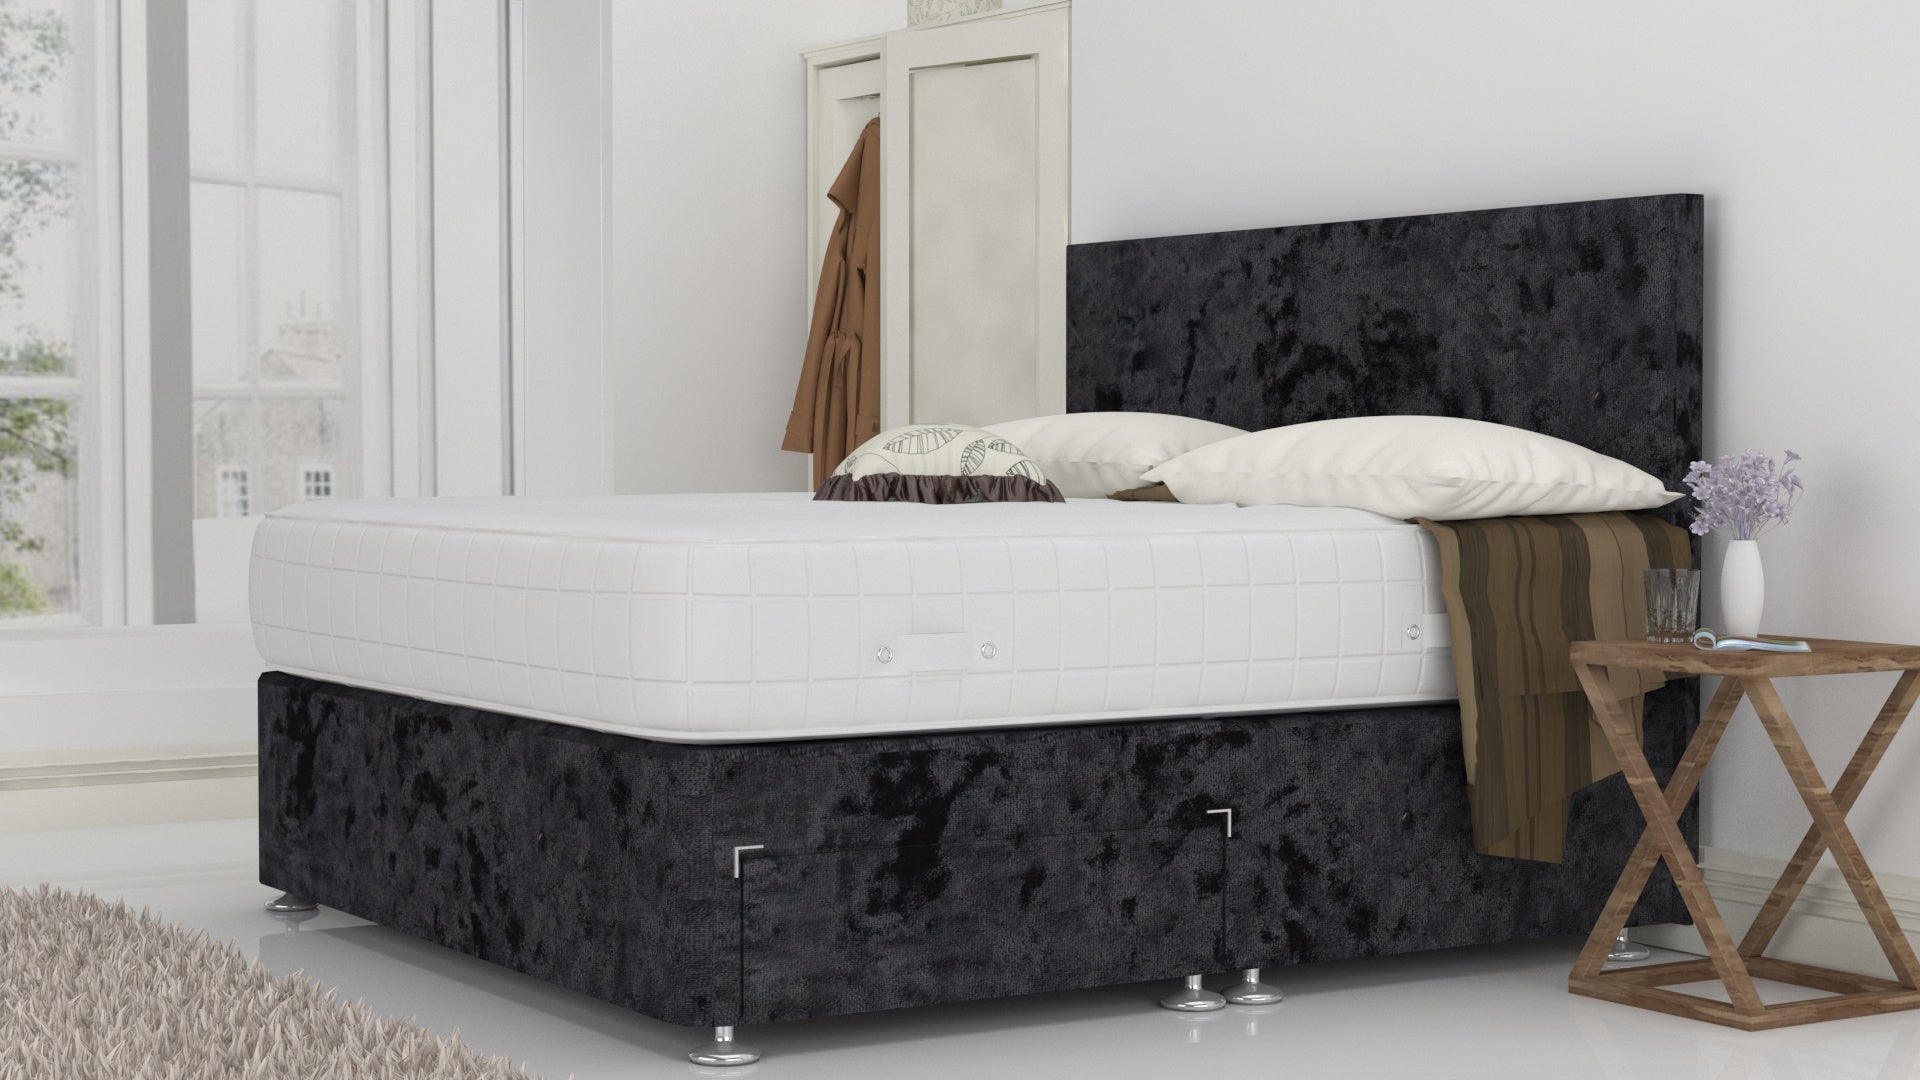 Black Crushed 4 Feet Divan Bed Set With Plain Headboard (Included Feet) And Free Memory Foam Mattress